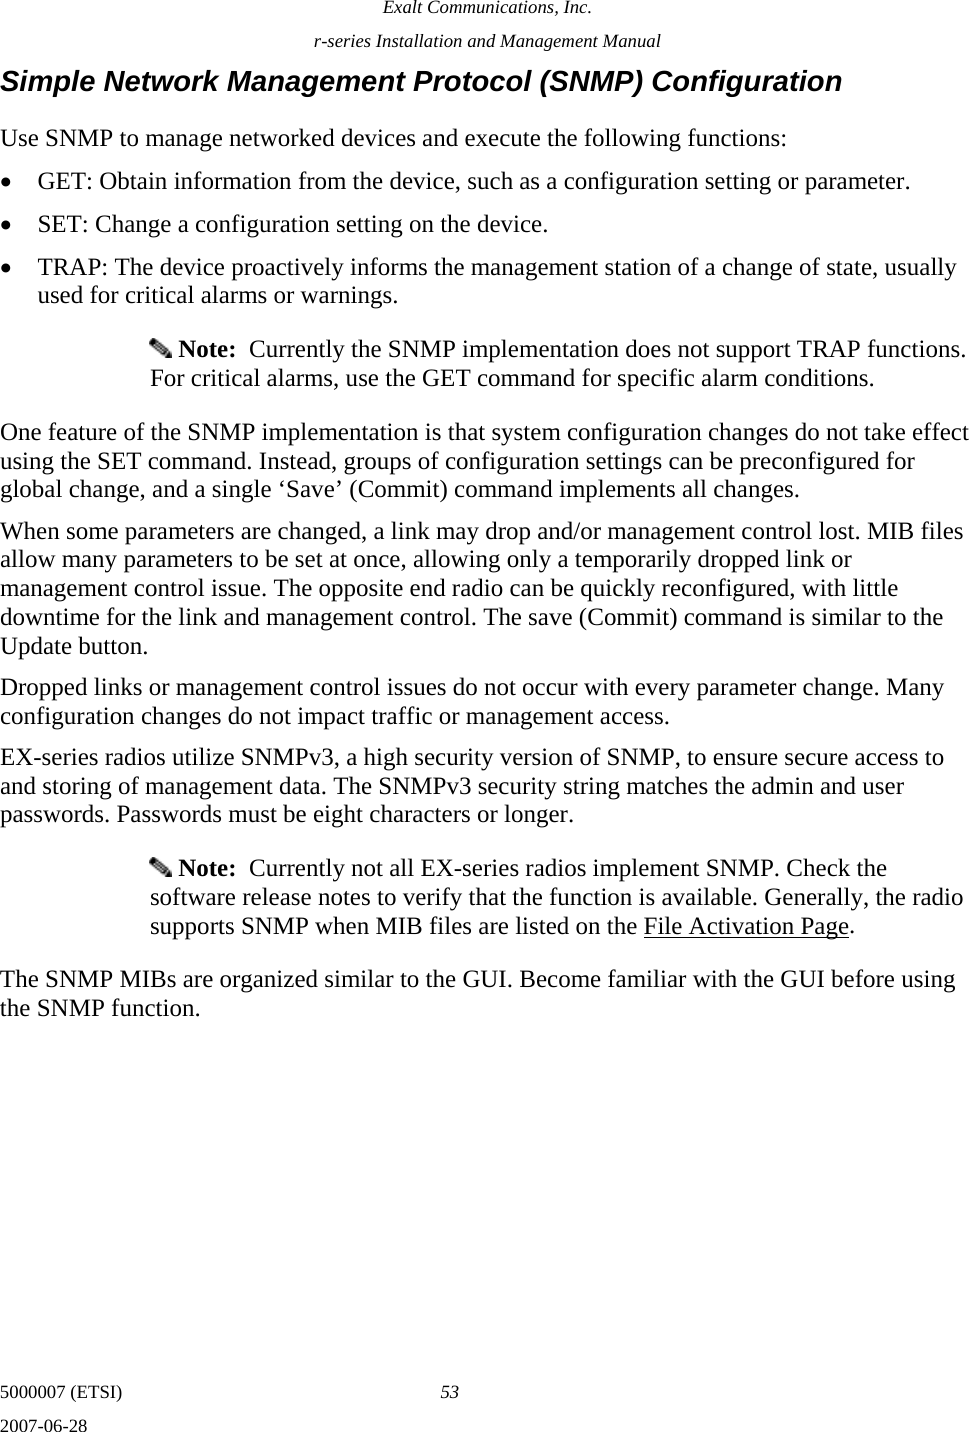 Exalt Communications, Inc. r-series Installation and Management Manual 5000007 (ETSI)  53 2007-06-28  Simple Network Management Protocol (SNMP) Configuration Use SNMP to manage networked devices and execute the following functions: • GET: Obtain information from the device, such as a configuration setting or parameter. • SET: Change a configuration setting on the device. • TRAP: The device proactively informs the management station of a change of state, usually used for critical alarms or warnings.  Note:  Currently the SNMP implementation does not support TRAP functions. For critical alarms, use the GET command for specific alarm conditions. One feature of the SNMP implementation is that system configuration changes do not take effect using the SET command. Instead, groups of configuration settings can be preconfigured for global change, and a single ‘Save’ (Commit) command implements all changes. When some parameters are changed, a link may drop and/or management control lost. MIB files allow many parameters to be set at once, allowing only a temporarily dropped link or management control issue. The opposite end radio can be quickly reconfigured, with little downtime for the link and management control. The save (Commit) command is similar to the Update button.  Dropped links or management control issues do not occur with every parameter change. Many configuration changes do not impact traffic or management access. EX-series radios utilize SNMPv3, a high security version of SNMP, to ensure secure access to and storing of management data. The SNMPv3 security string matches the admin and user passwords. Passwords must be eight characters or longer.  Note:  Currently not all EX-series radios implement SNMP. Check the software release notes to verify that the function is available. Generally, the radio supports SNMP when MIB files are listed on the File Activation Page. The SNMP MIBs are organized similar to the GUI. Become familiar with the GUI before using the SNMP function. 